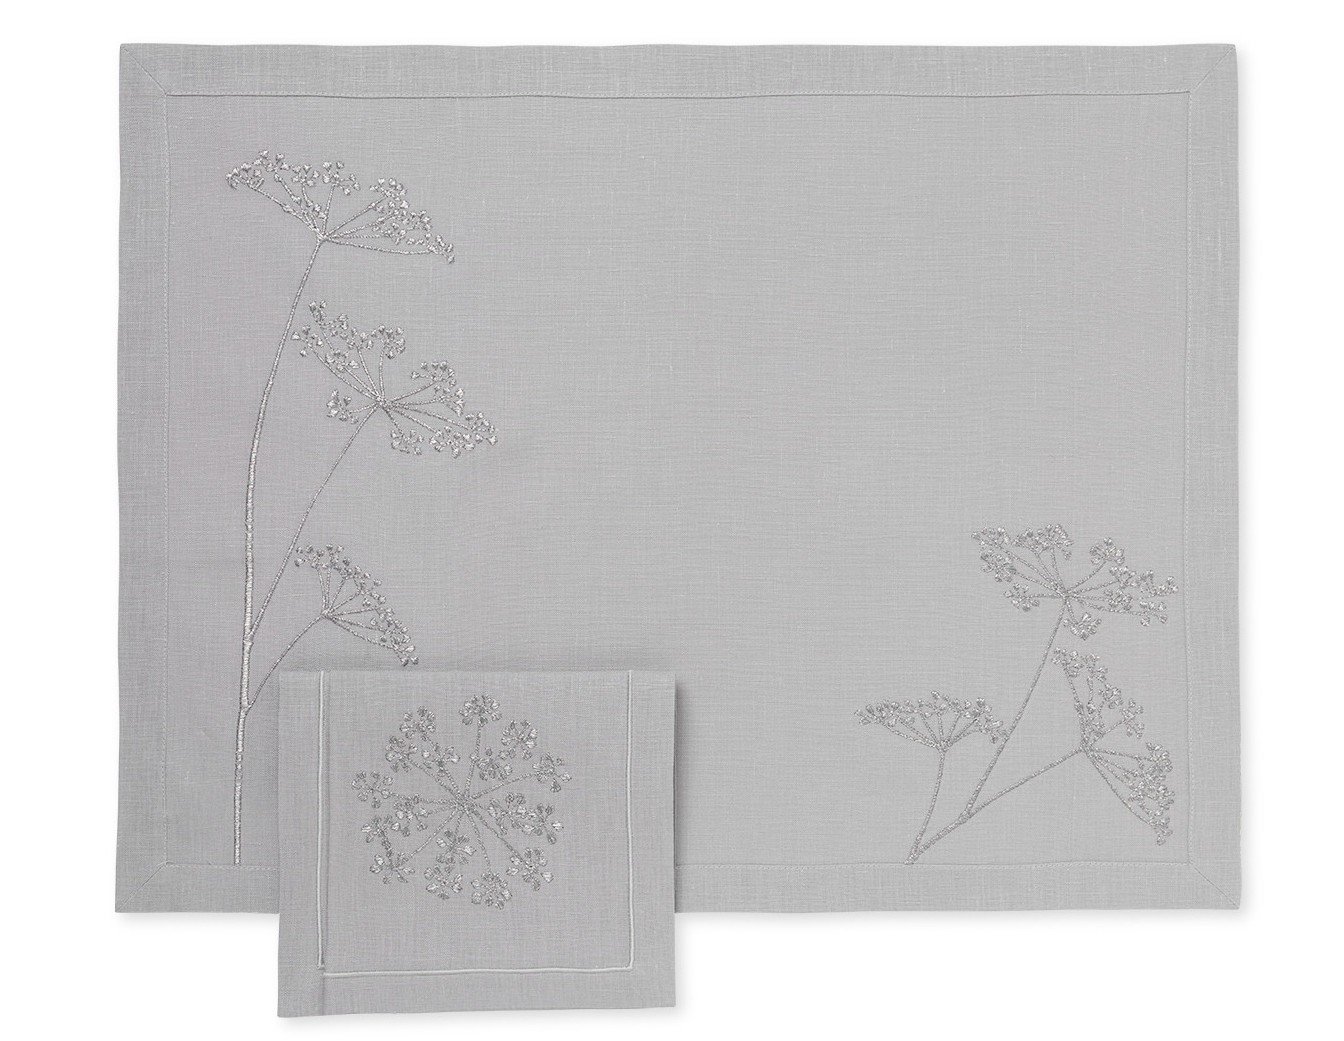 "Ombelles" placemat and napkin